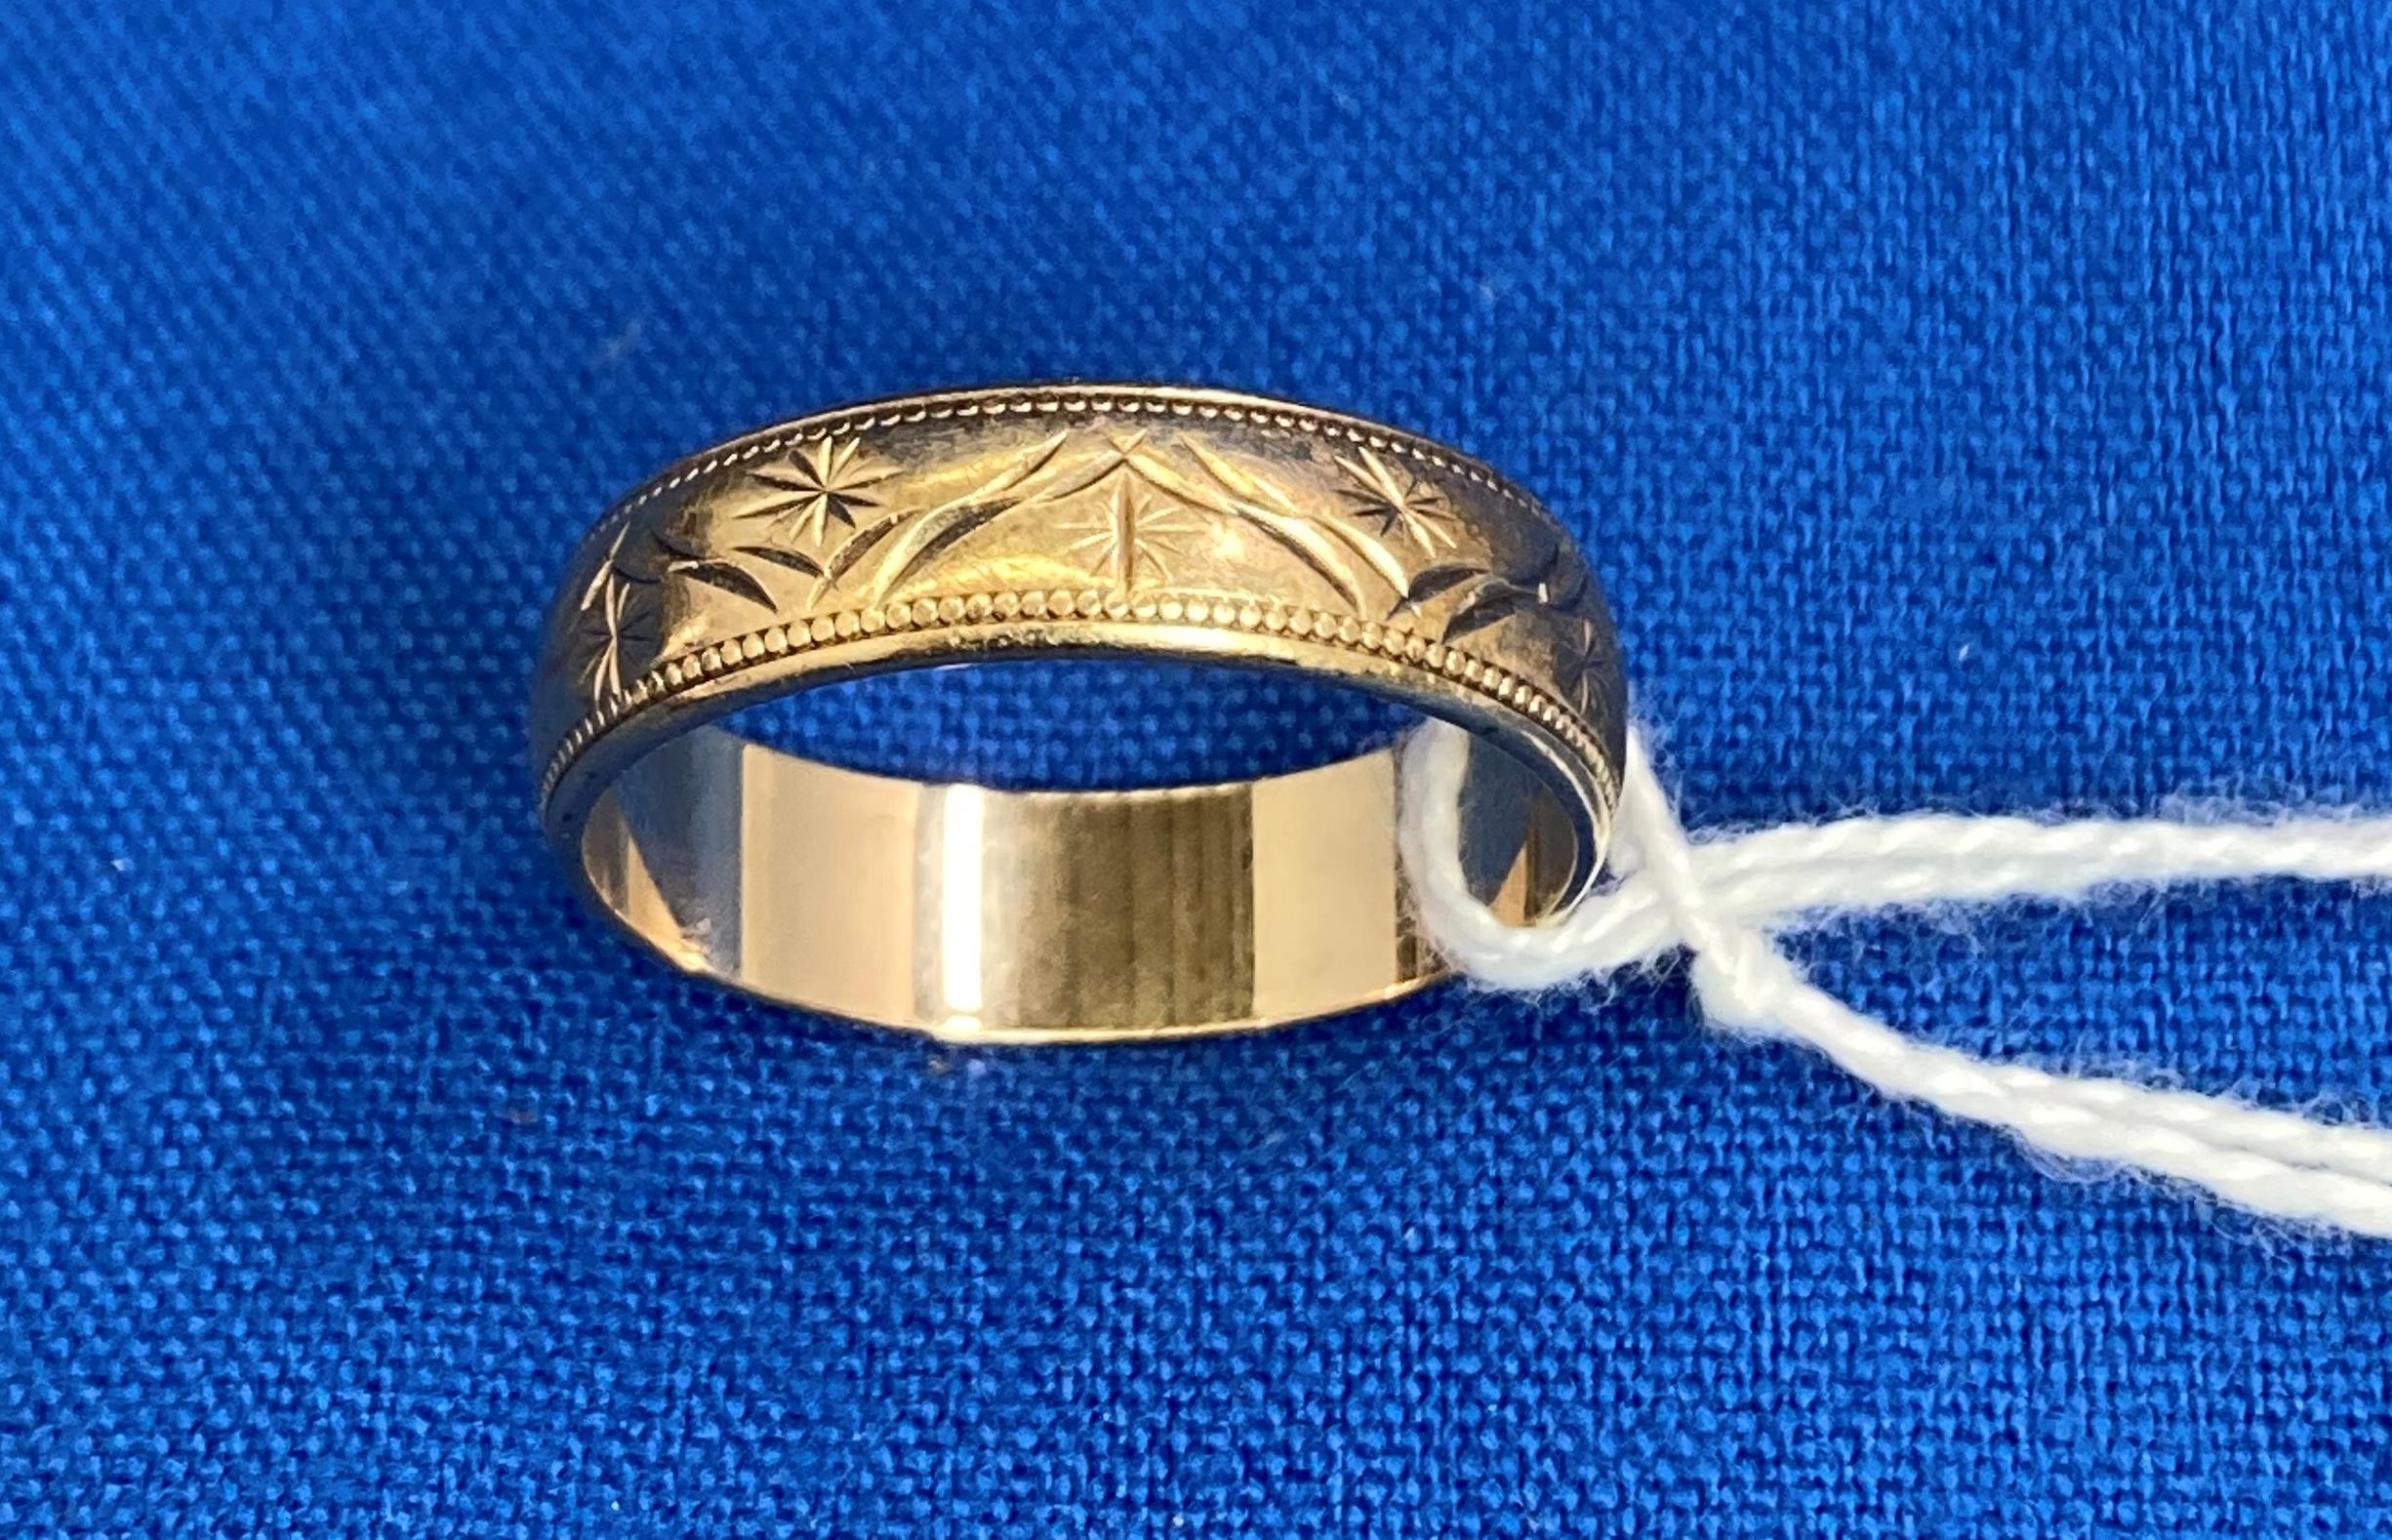 9ct gold (375) wedding band with etched scrolling design, size U. Weight: 4.